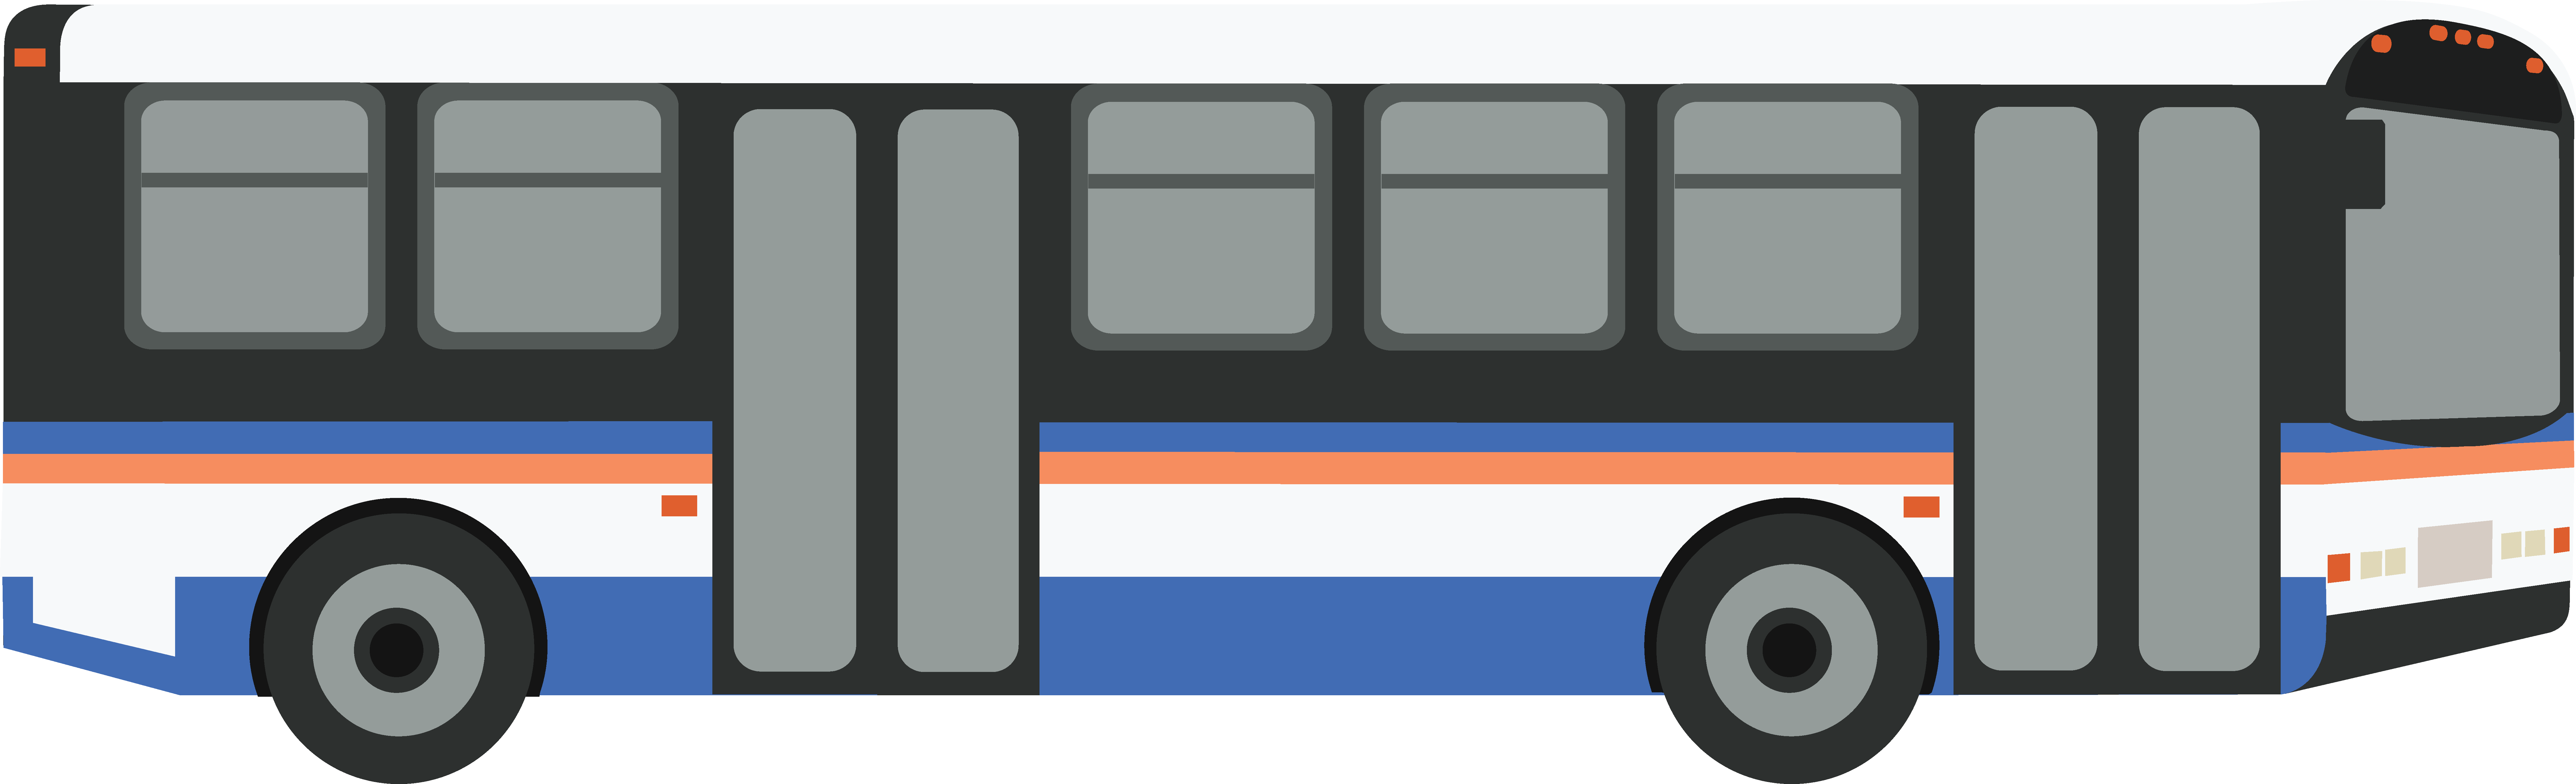 City Bus Side View Png - City, Transparent background PNG HD thumbnail